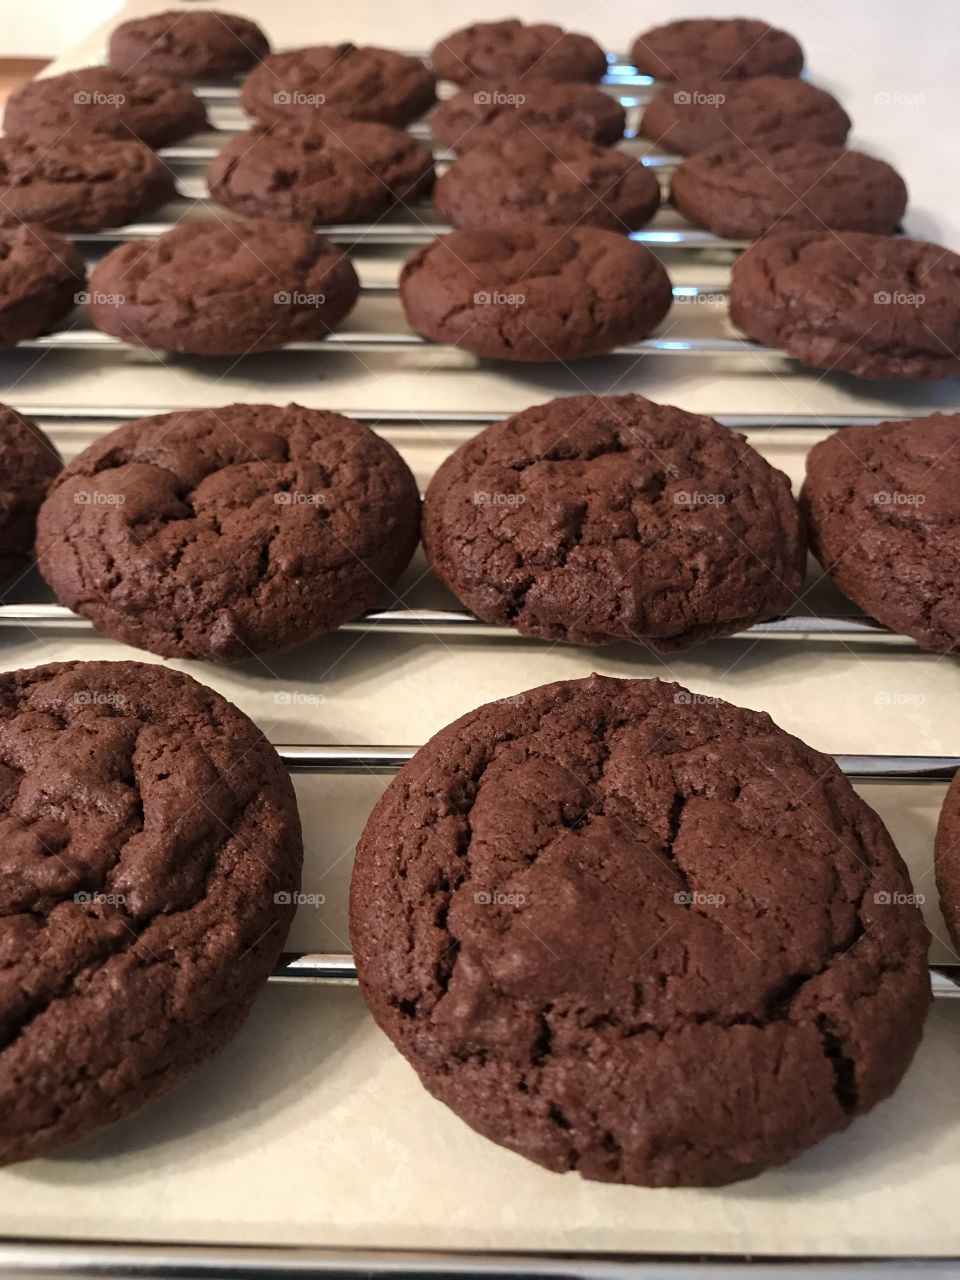 Home made soft chocolate cookies fresh from the oven.  The house smells of heavenly cocoa.